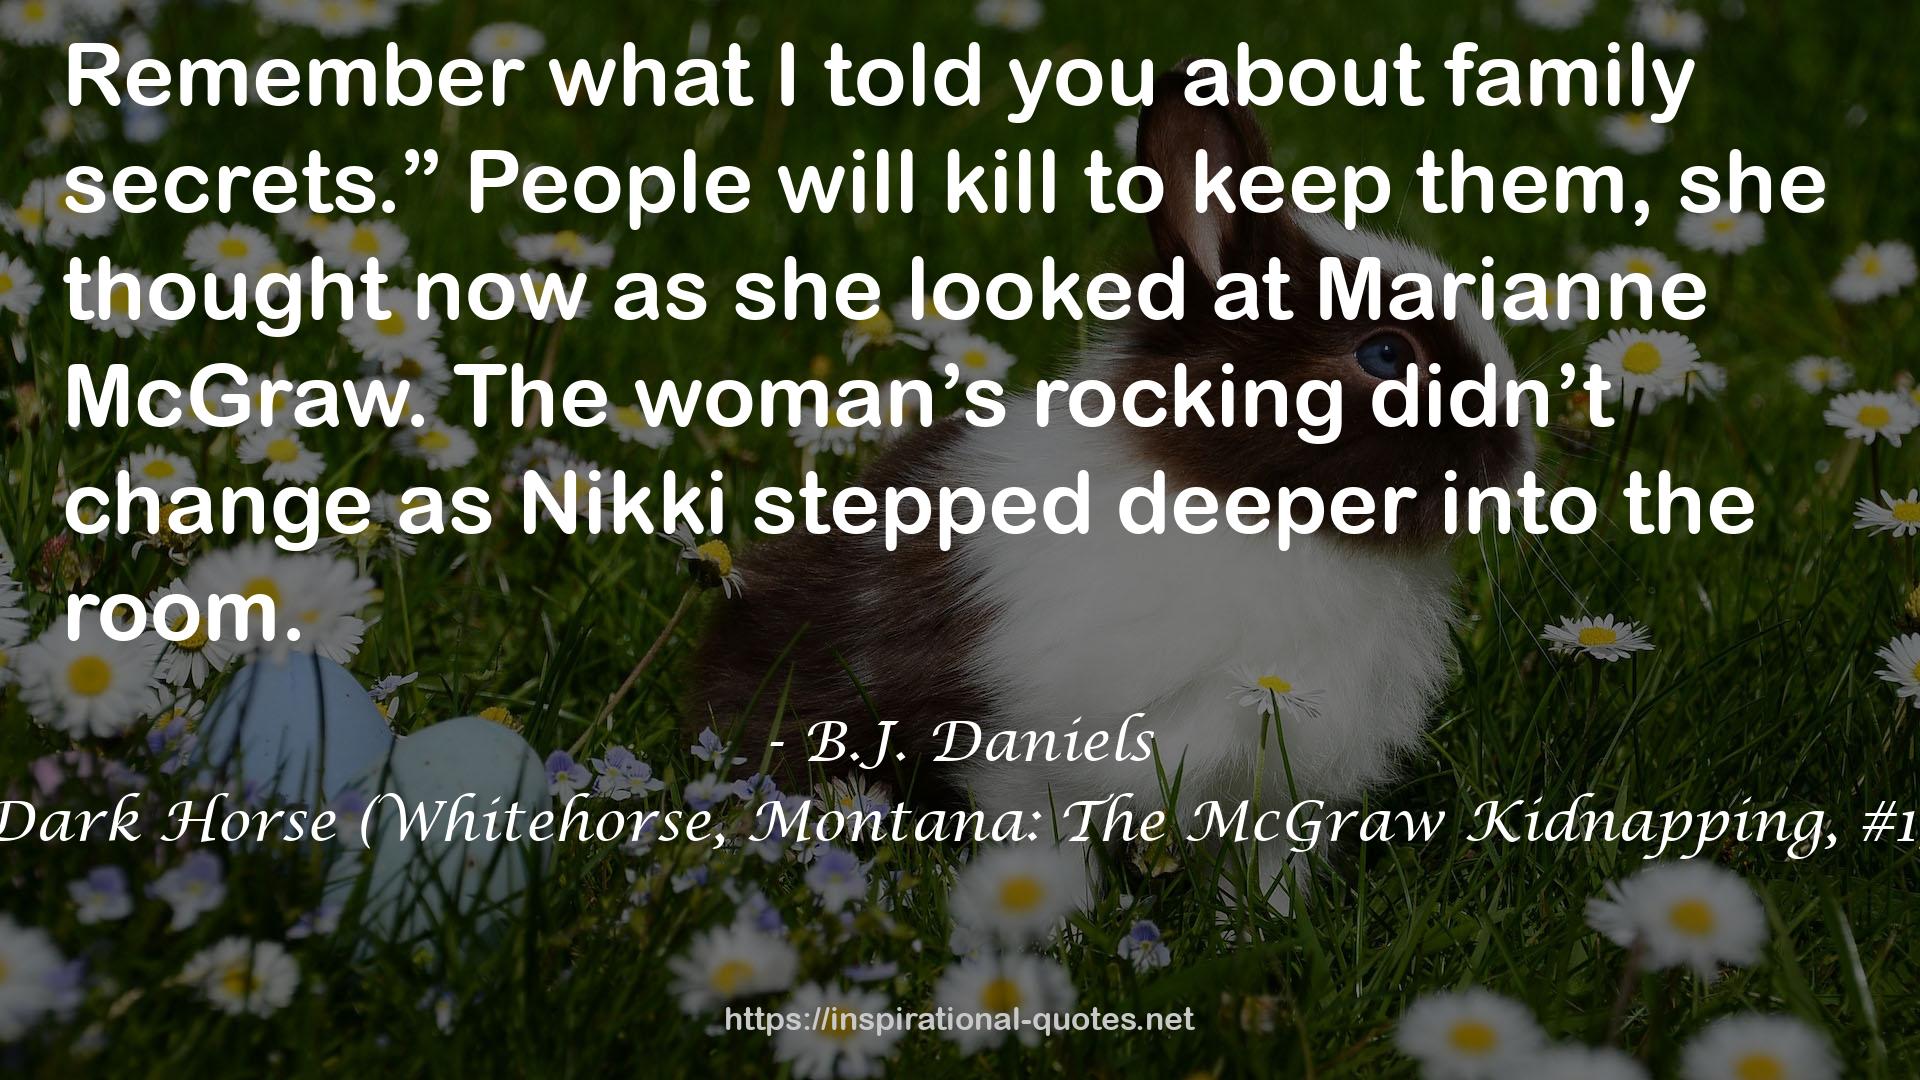 Dark Horse (Whitehorse, Montana: The McGraw Kidnapping, #1) QUOTES